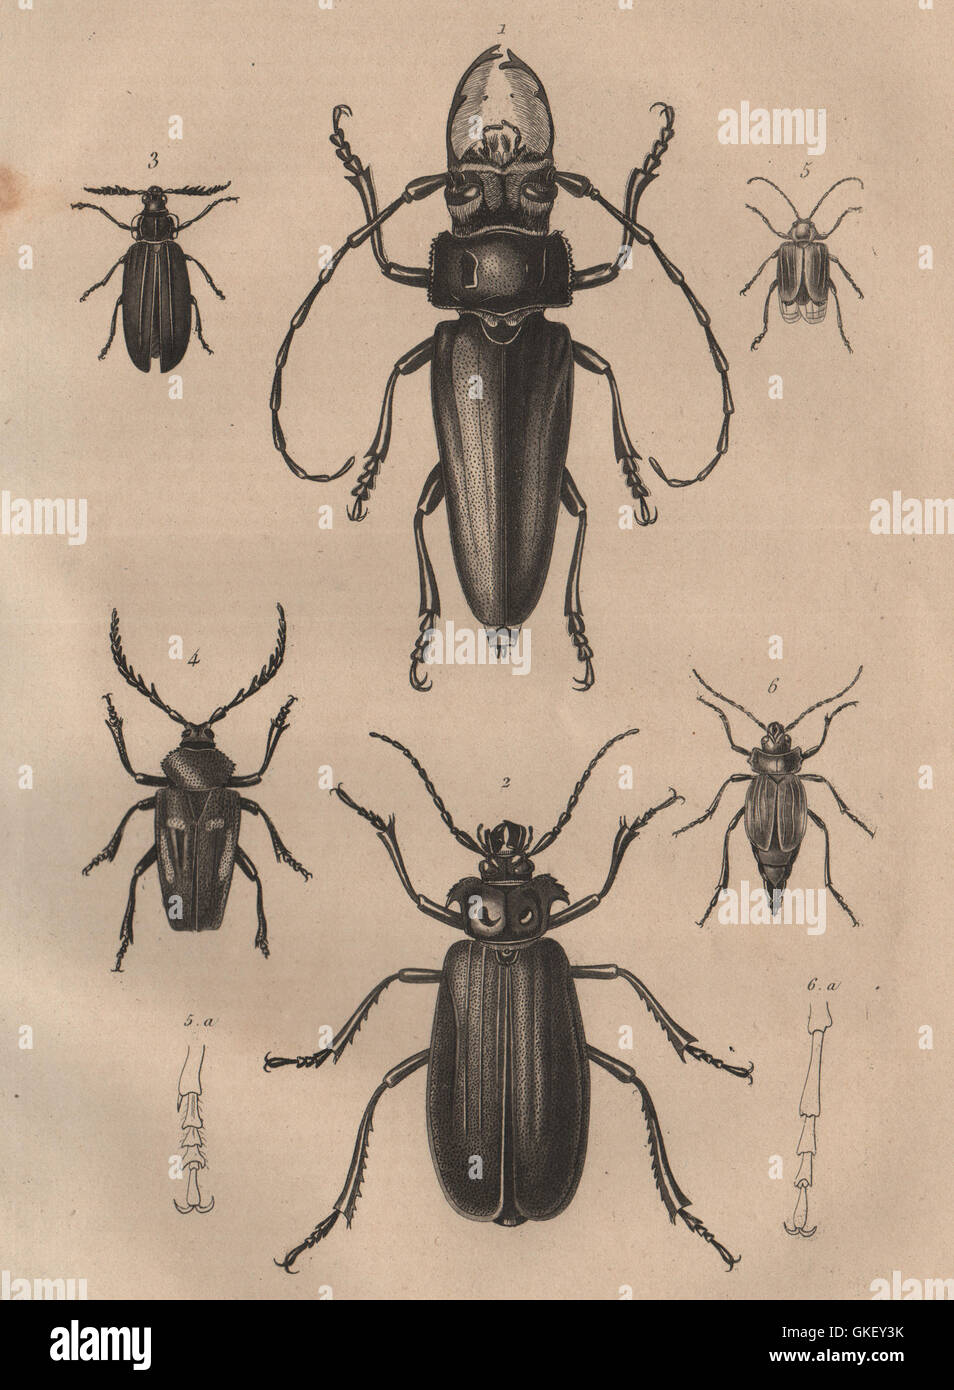 INSECTS: Prioninae (Long Horned Beetle). III, antique print 1834 Stock Photo